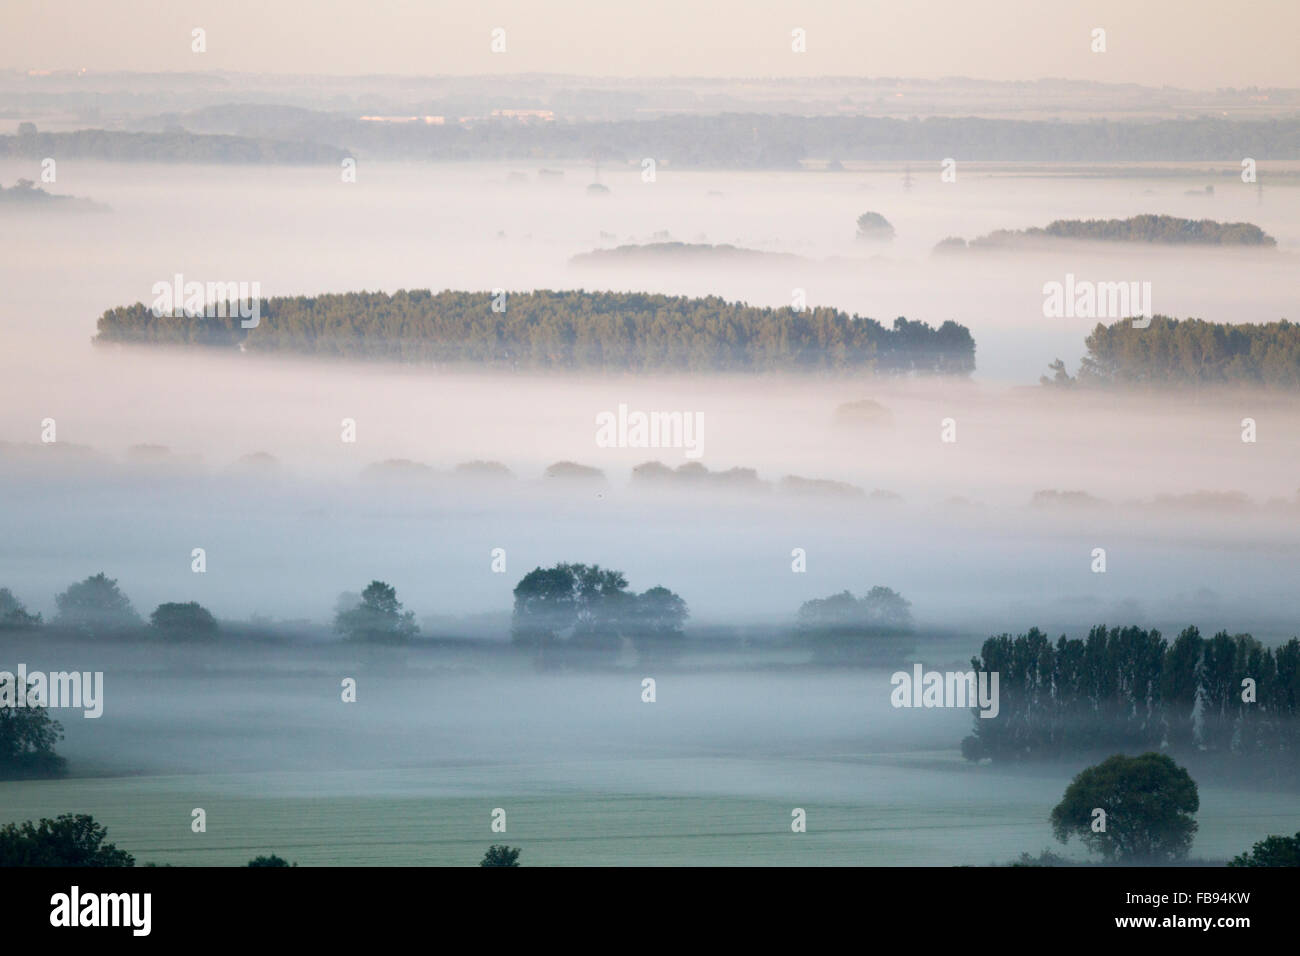 River Ancholme Valley, North Lincolnshire, mist, trees above mist in valley, Stock Photo